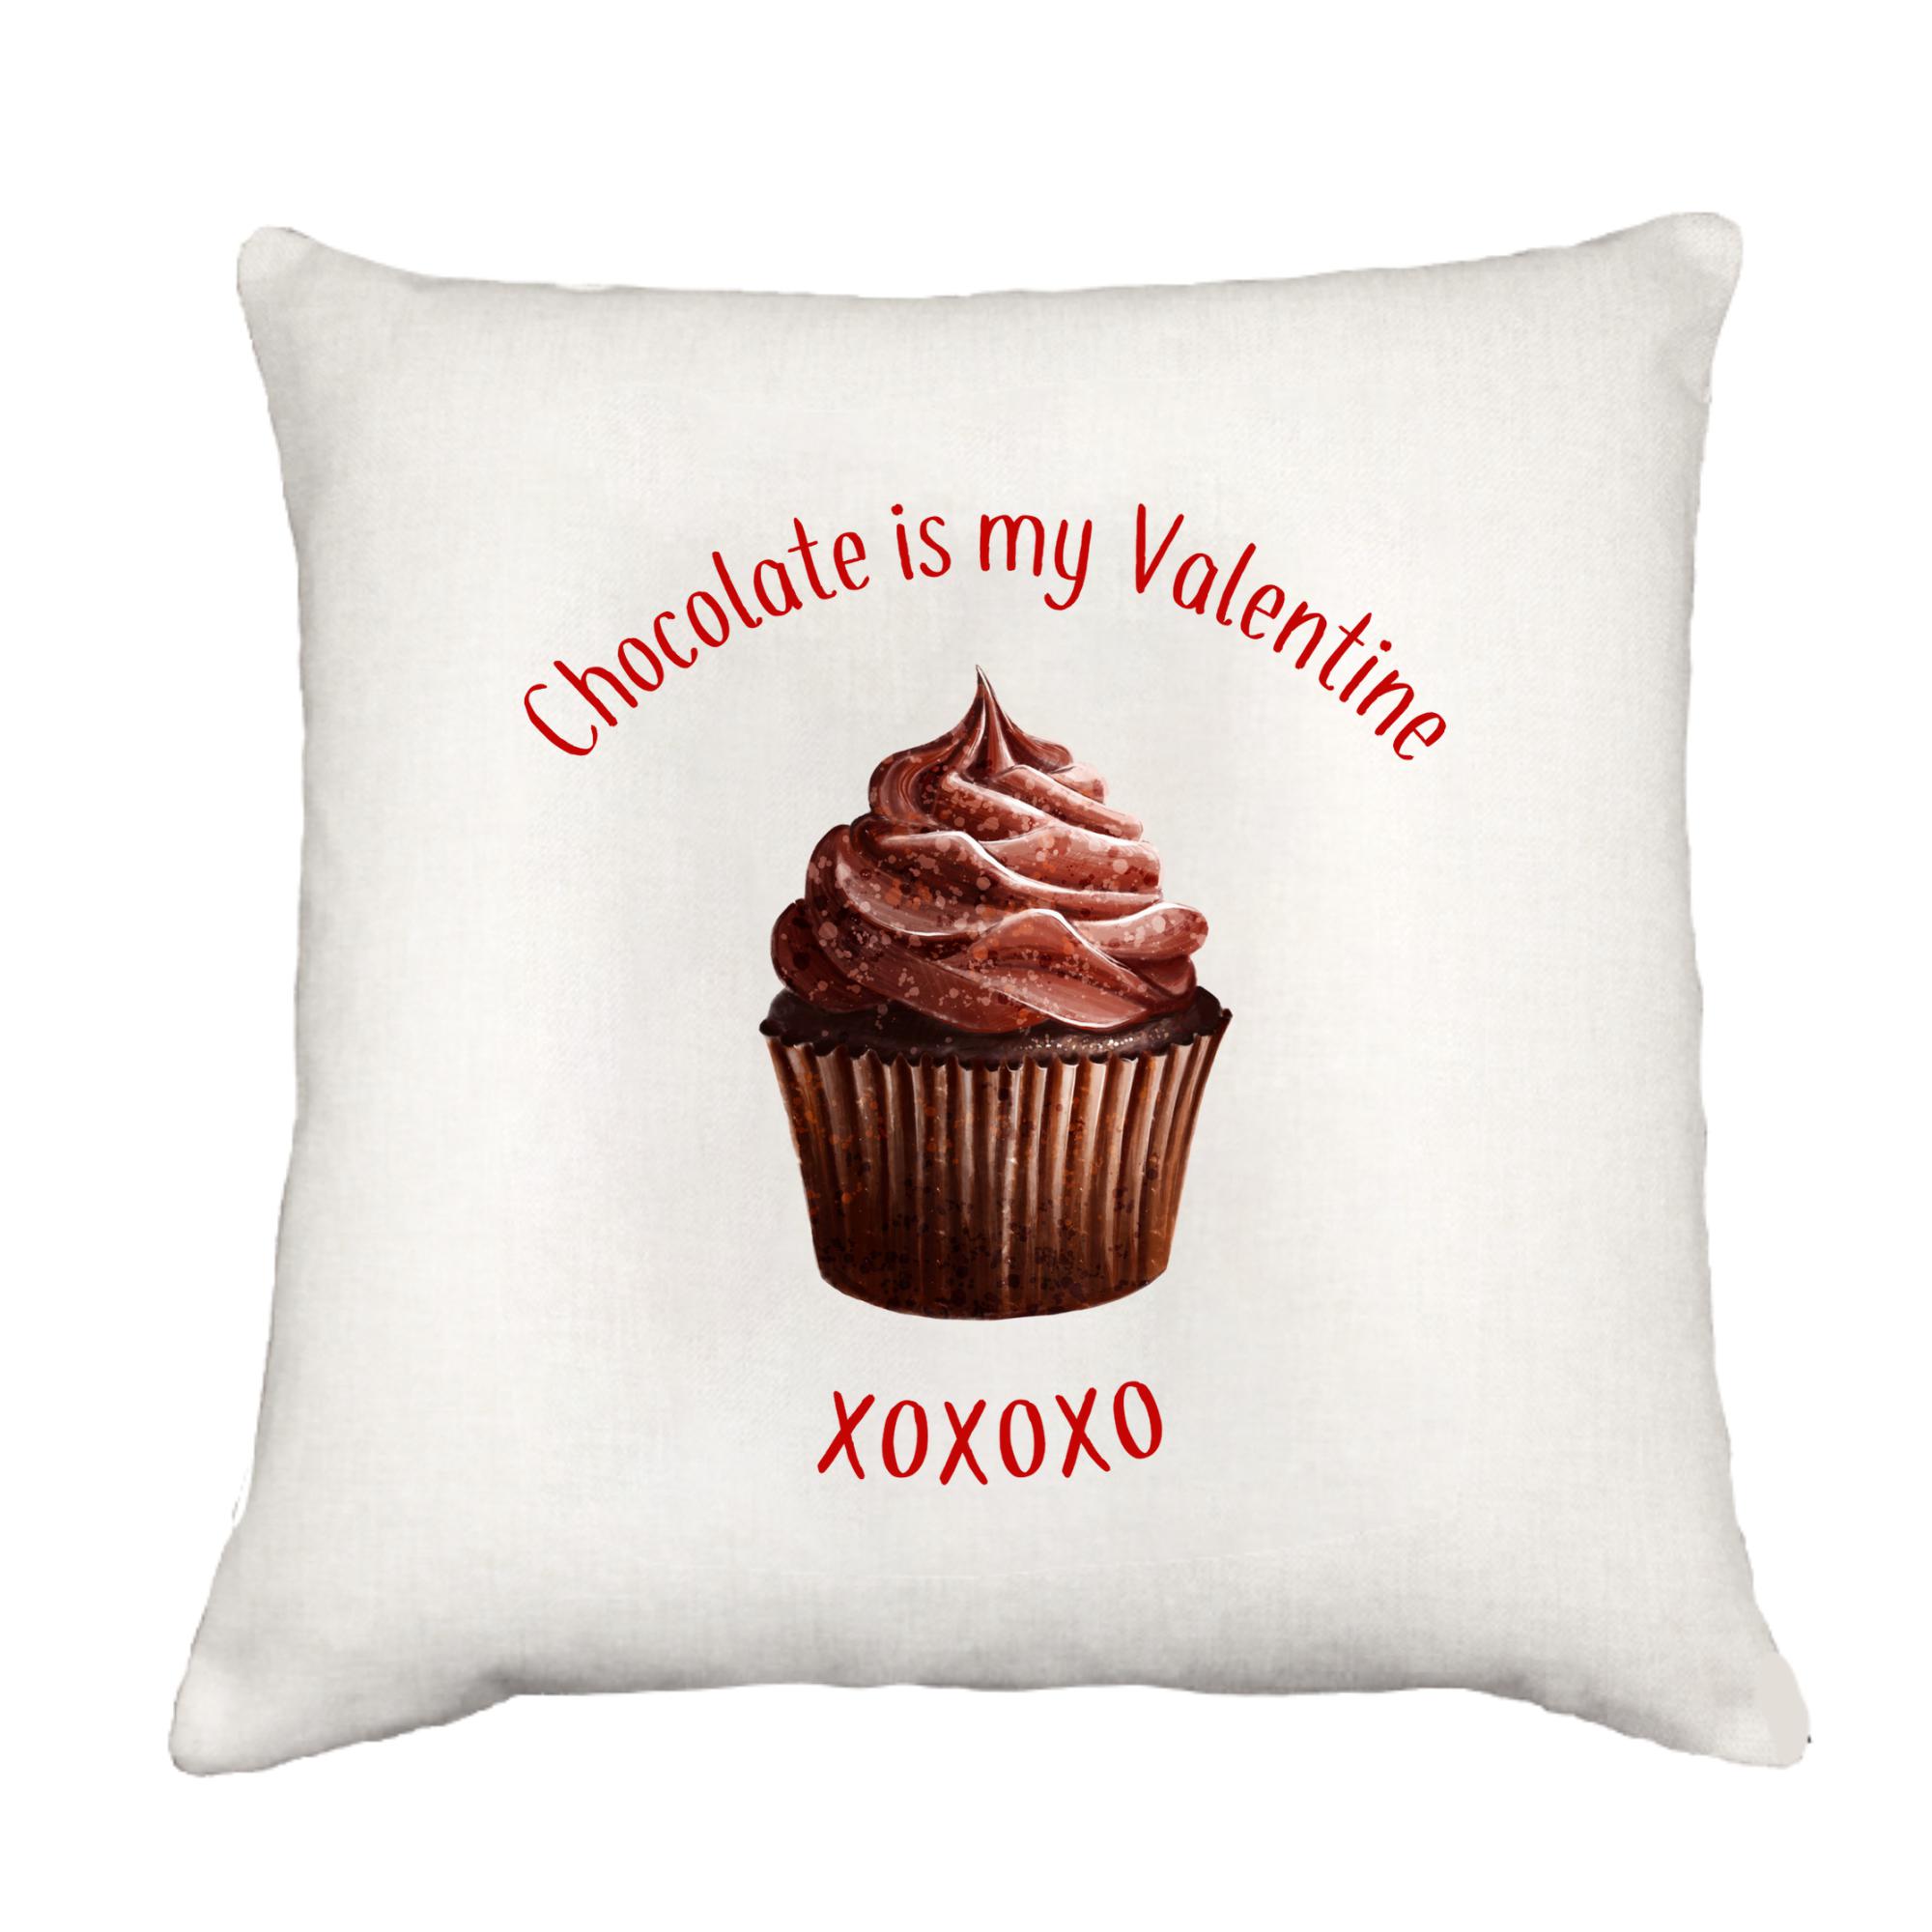 Chocolate Valentine Cottage Pillow Throw/Decorative Pillow - Southern Sisters